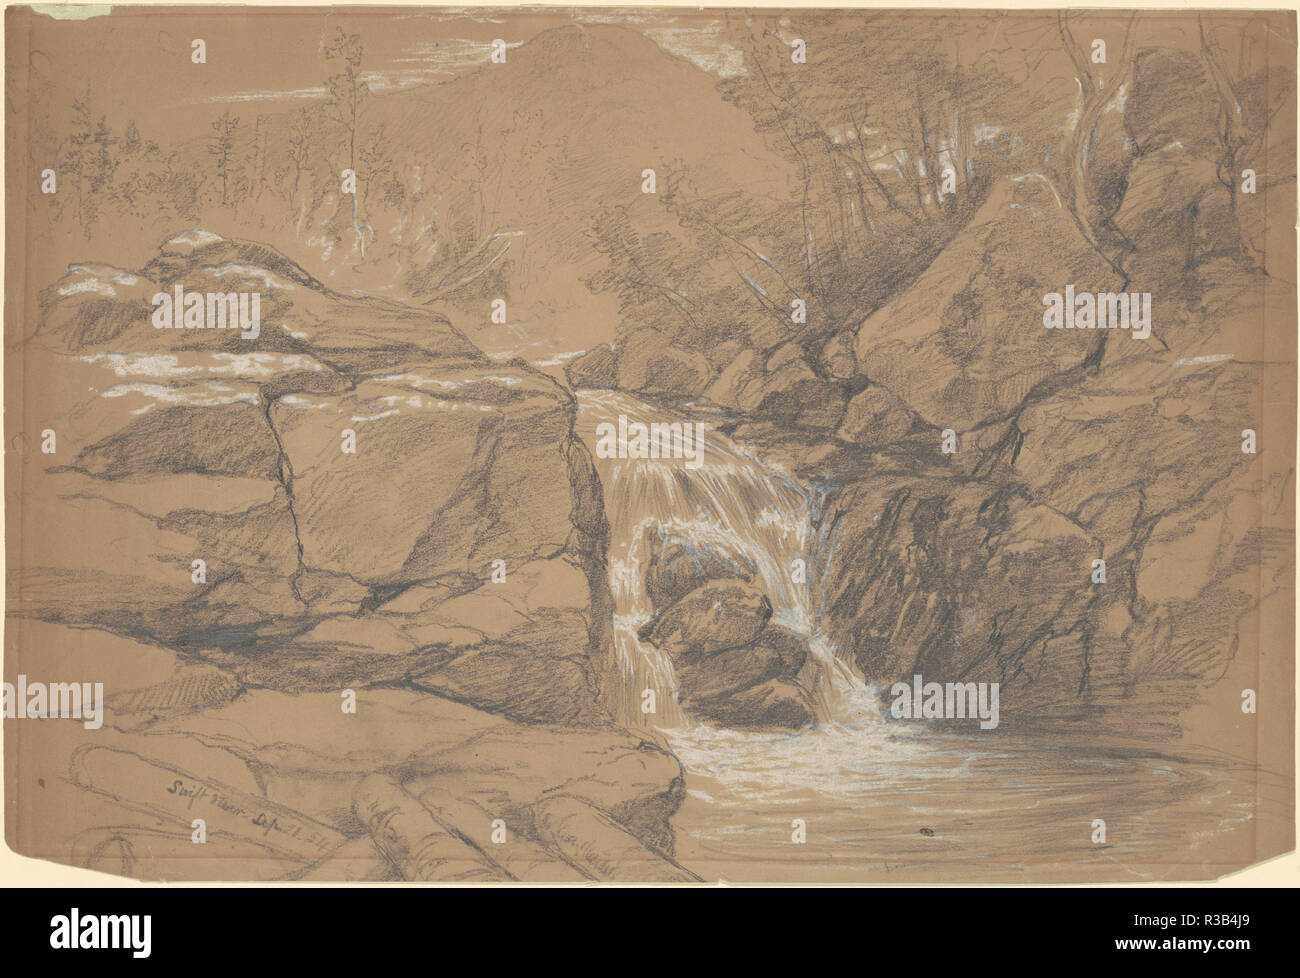 Swiftwater. Dated: 1854. Dimensions: sheet: 11 7/16 x 16 13/16 in. (29.05 x 42.7 cm). Medium: graphite with gouache on wove paper. Museum: National Gallery of Art, Washington DC. Author: DANIEL HUNTINGTON. Stock Photo